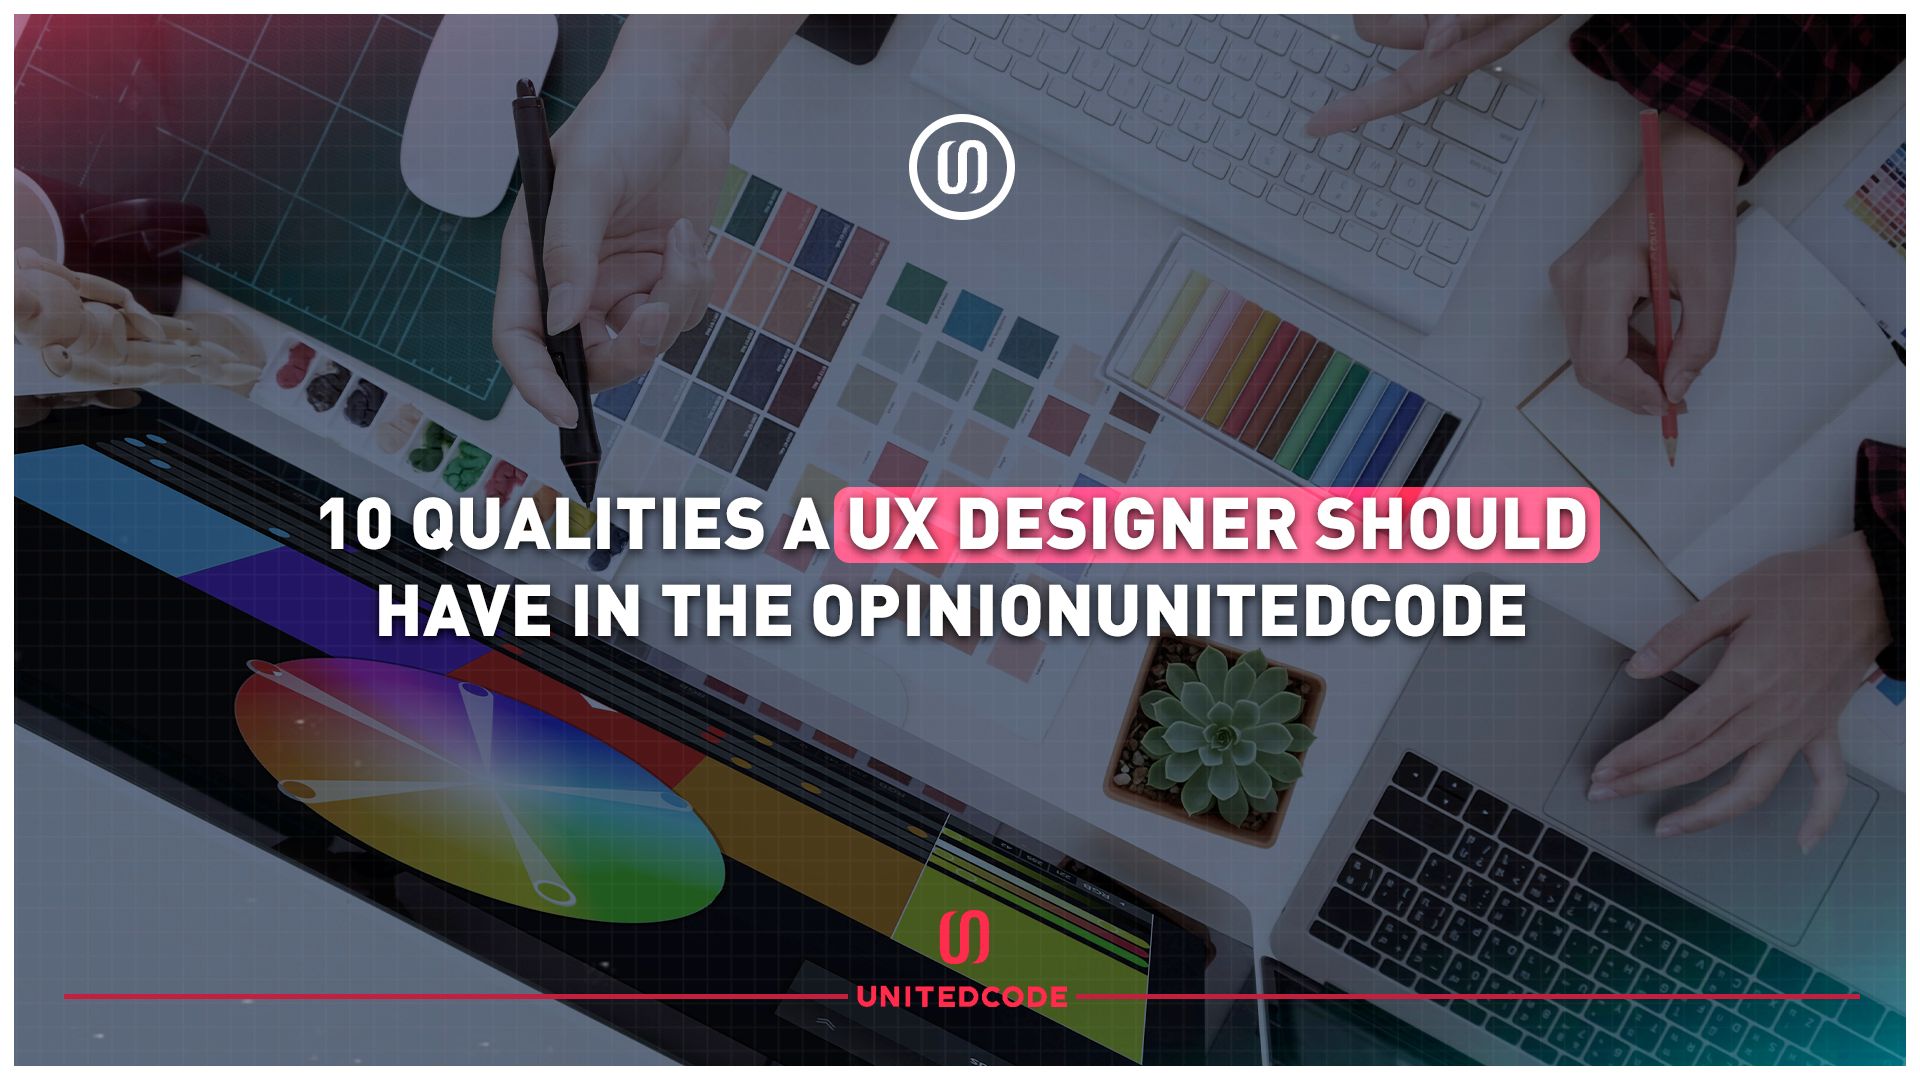 10 qualities a UX designer should have in the opinionunitedcode